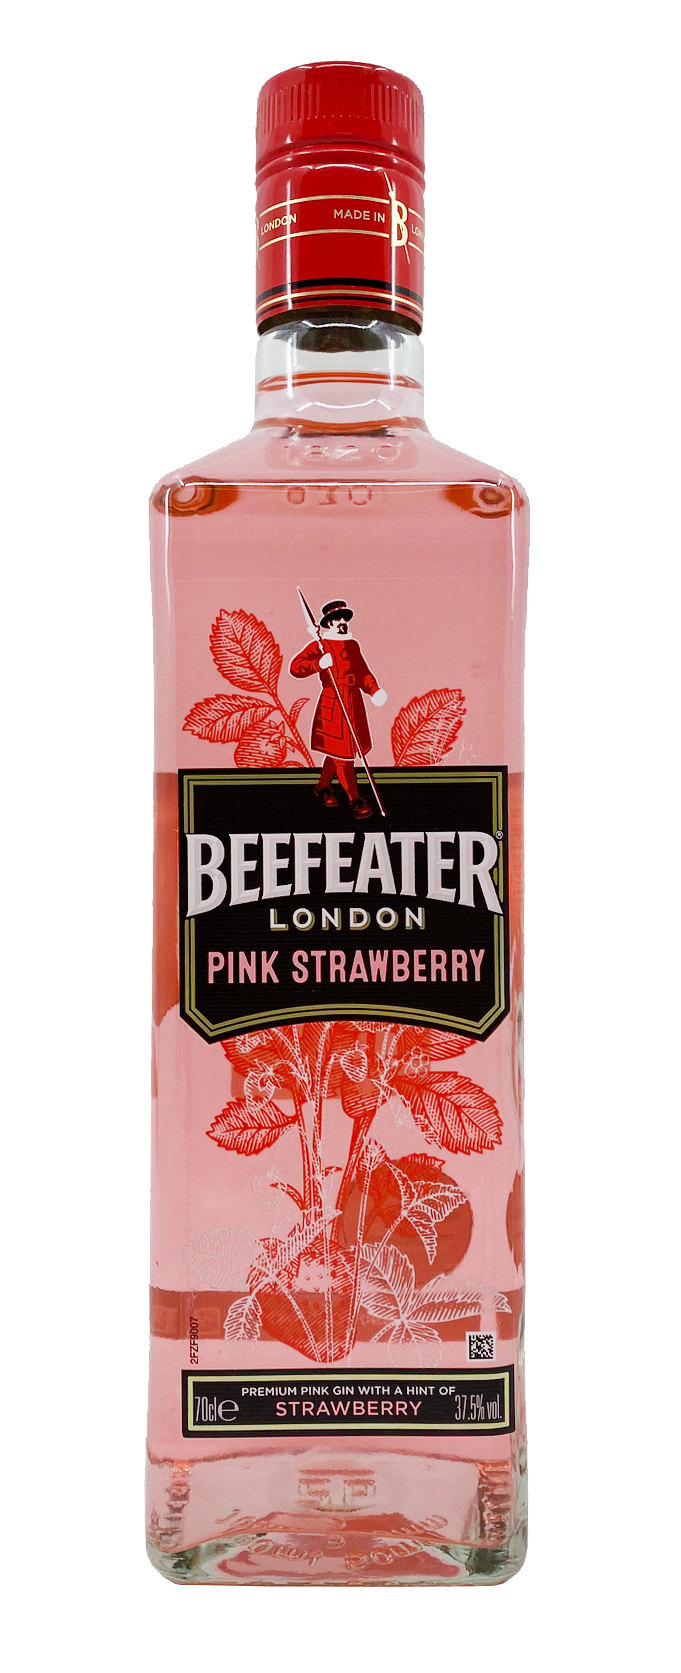 Beefeater London Pink Strawberry Gin 0,7l 37,5%vol.